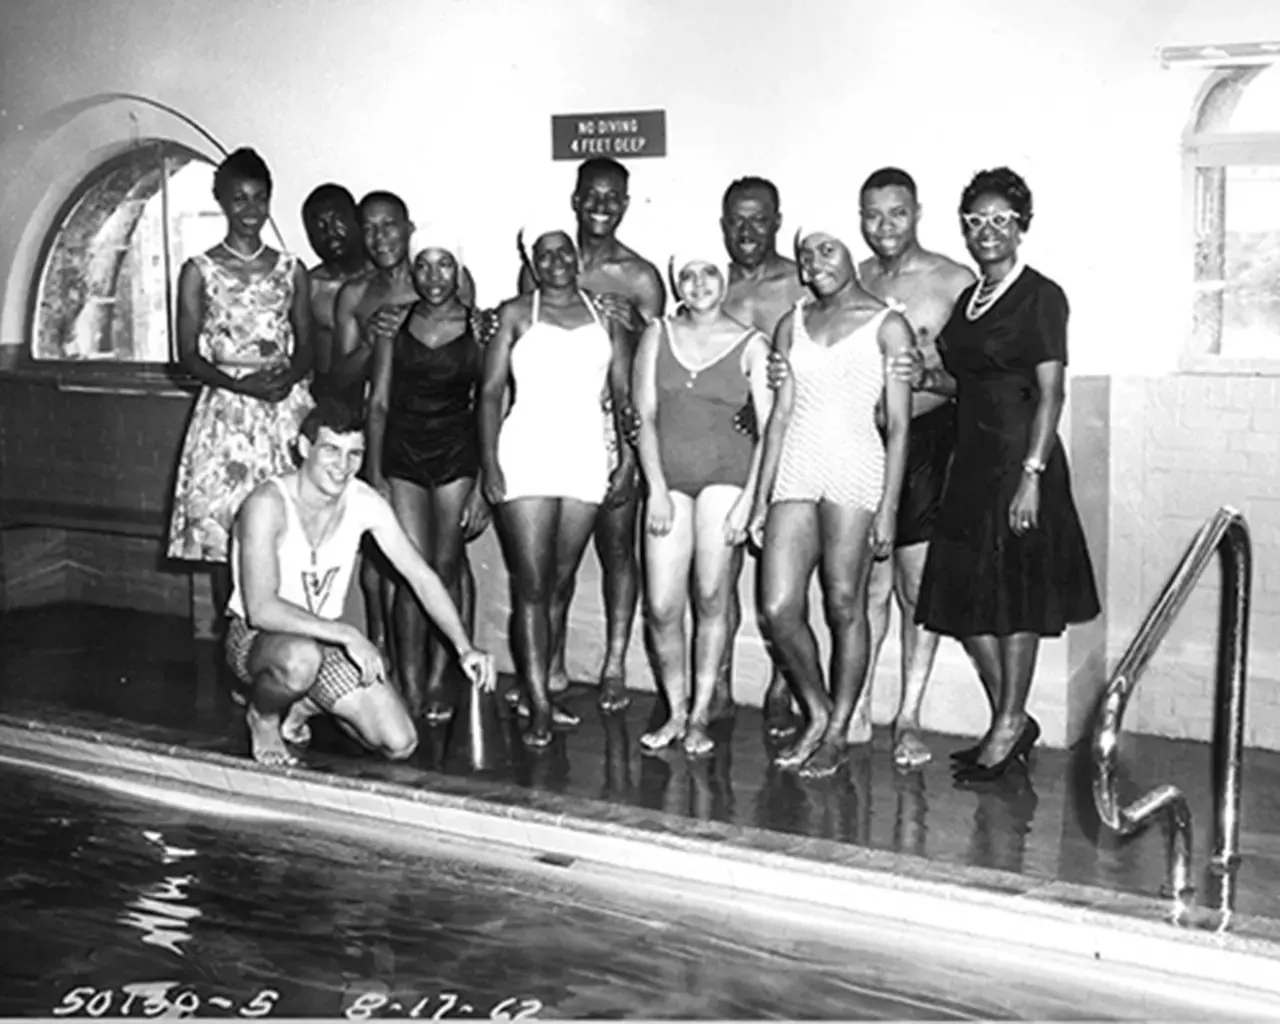 Archival image at the Kelly Pool, the Fairmount Water Works,&nbsp;1962. Photo&nbsp;courtesy of the Fairmount Water Works and Philadelphia Water Department Collection.